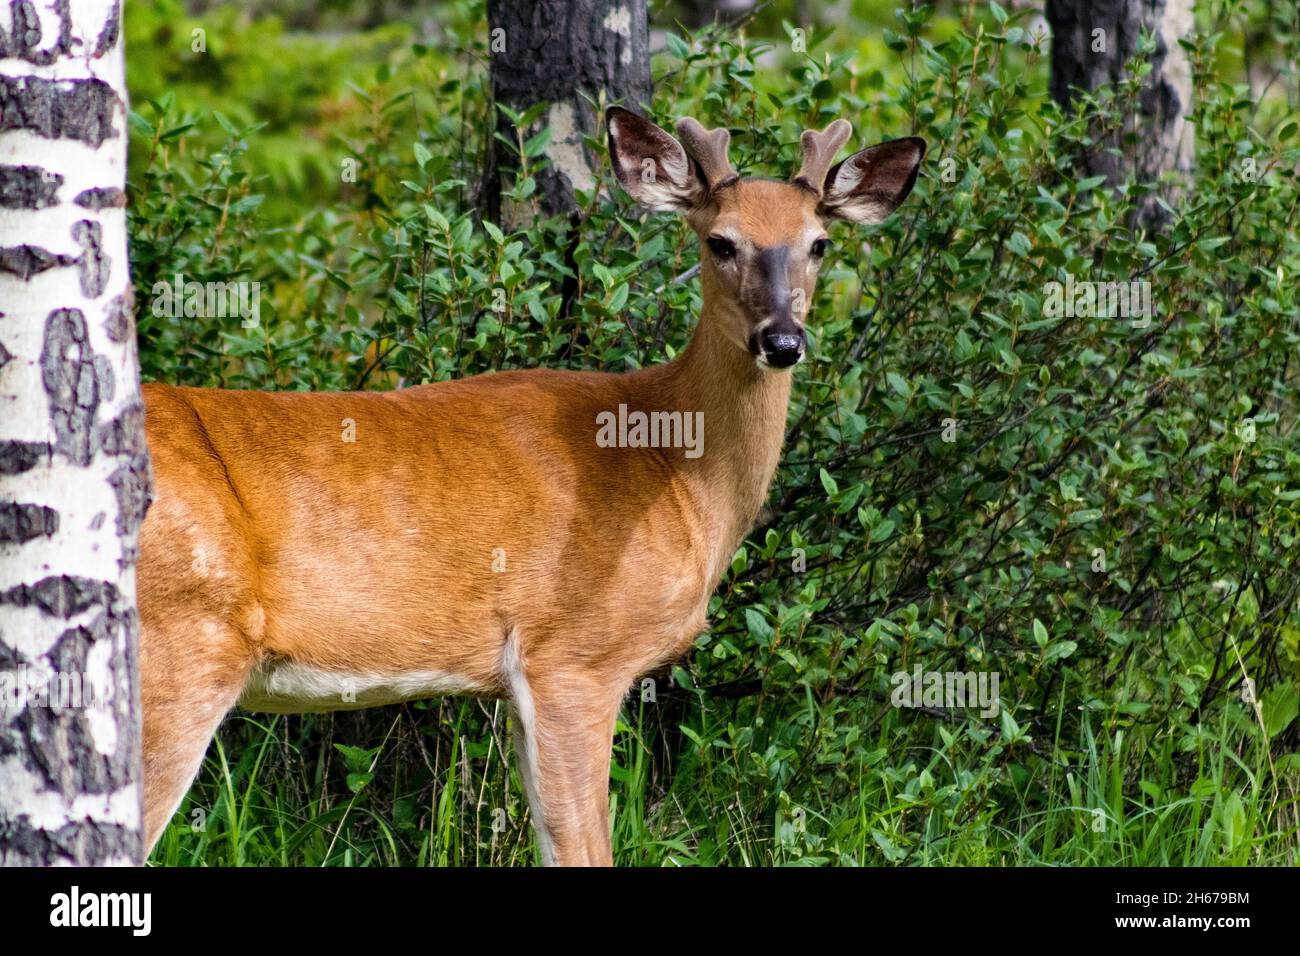 Young male deer standing sideways looking at camera, back half behind tree. Antlers sprouting. green background Stock Photo